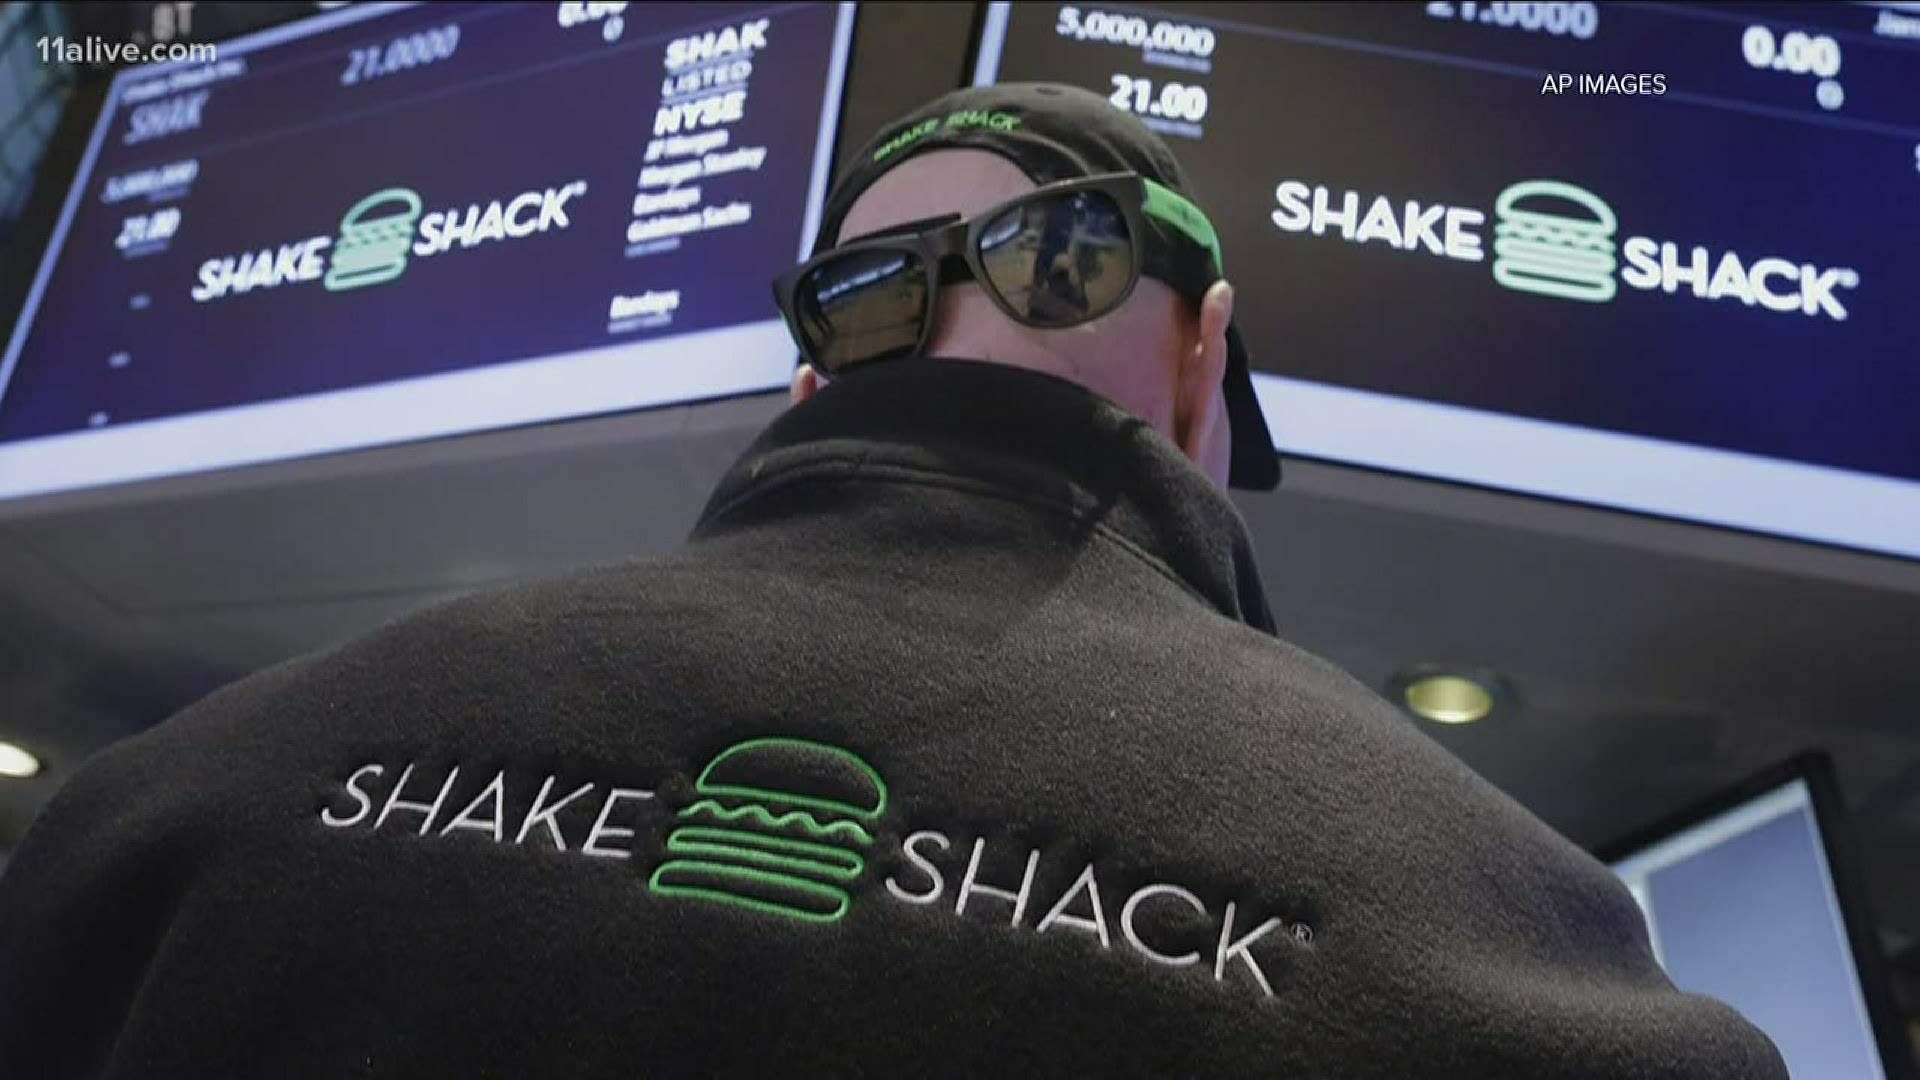 Several small business owners weren't able to get the loans and were surprised to learn more than a dozen large chains like Shake Shack had been approved.